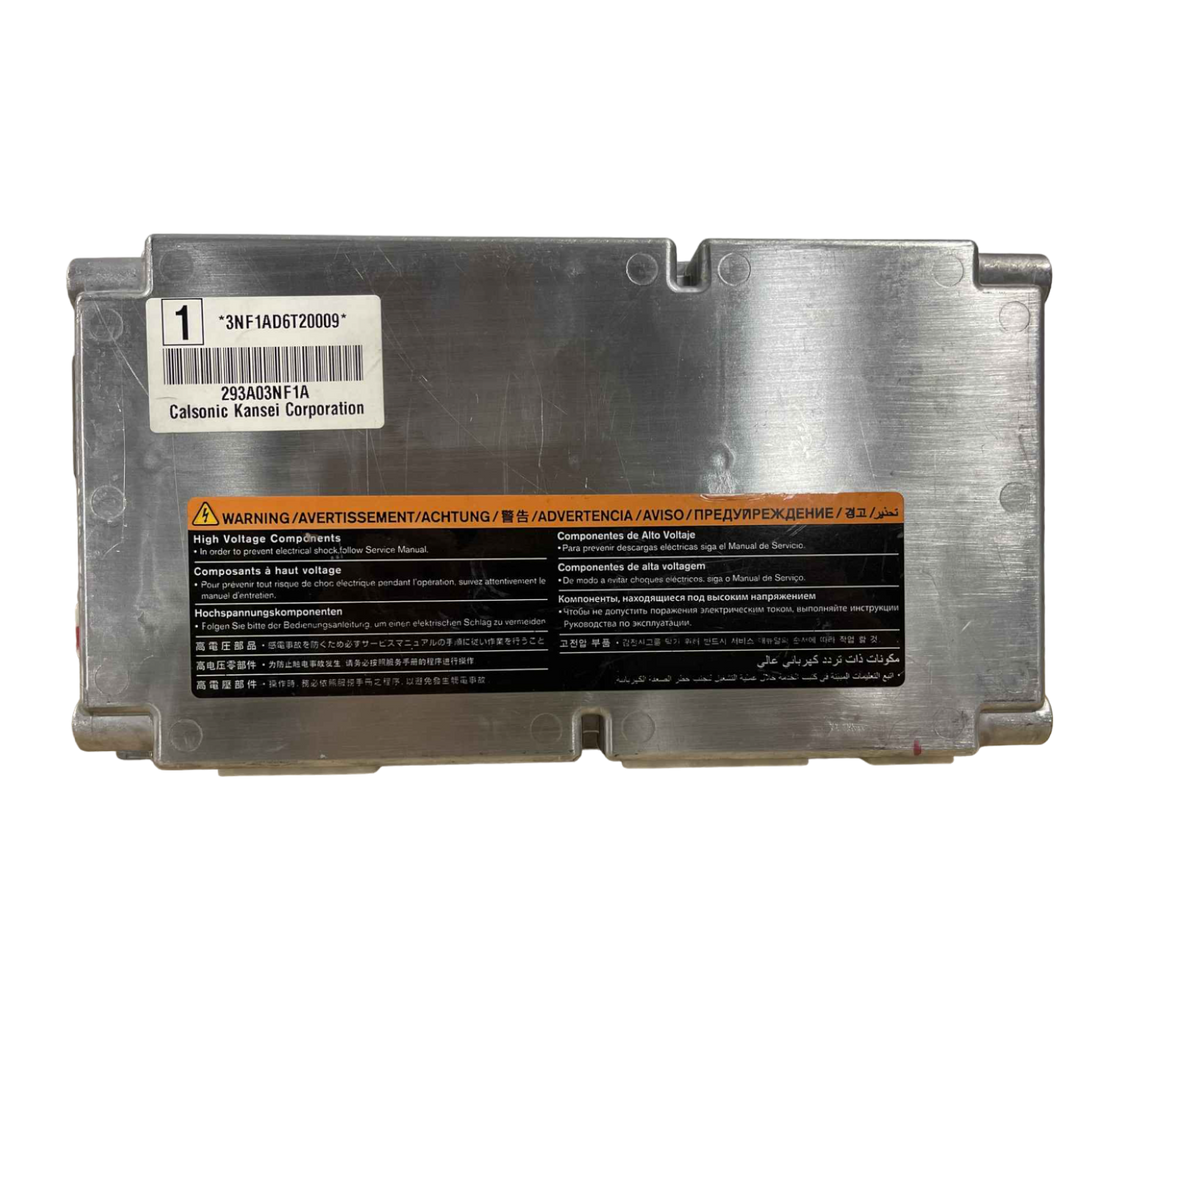 NISSAN LEAF GEN 1 CONTROL ASSEMBLY - BATTERY 293A0-3NF1A